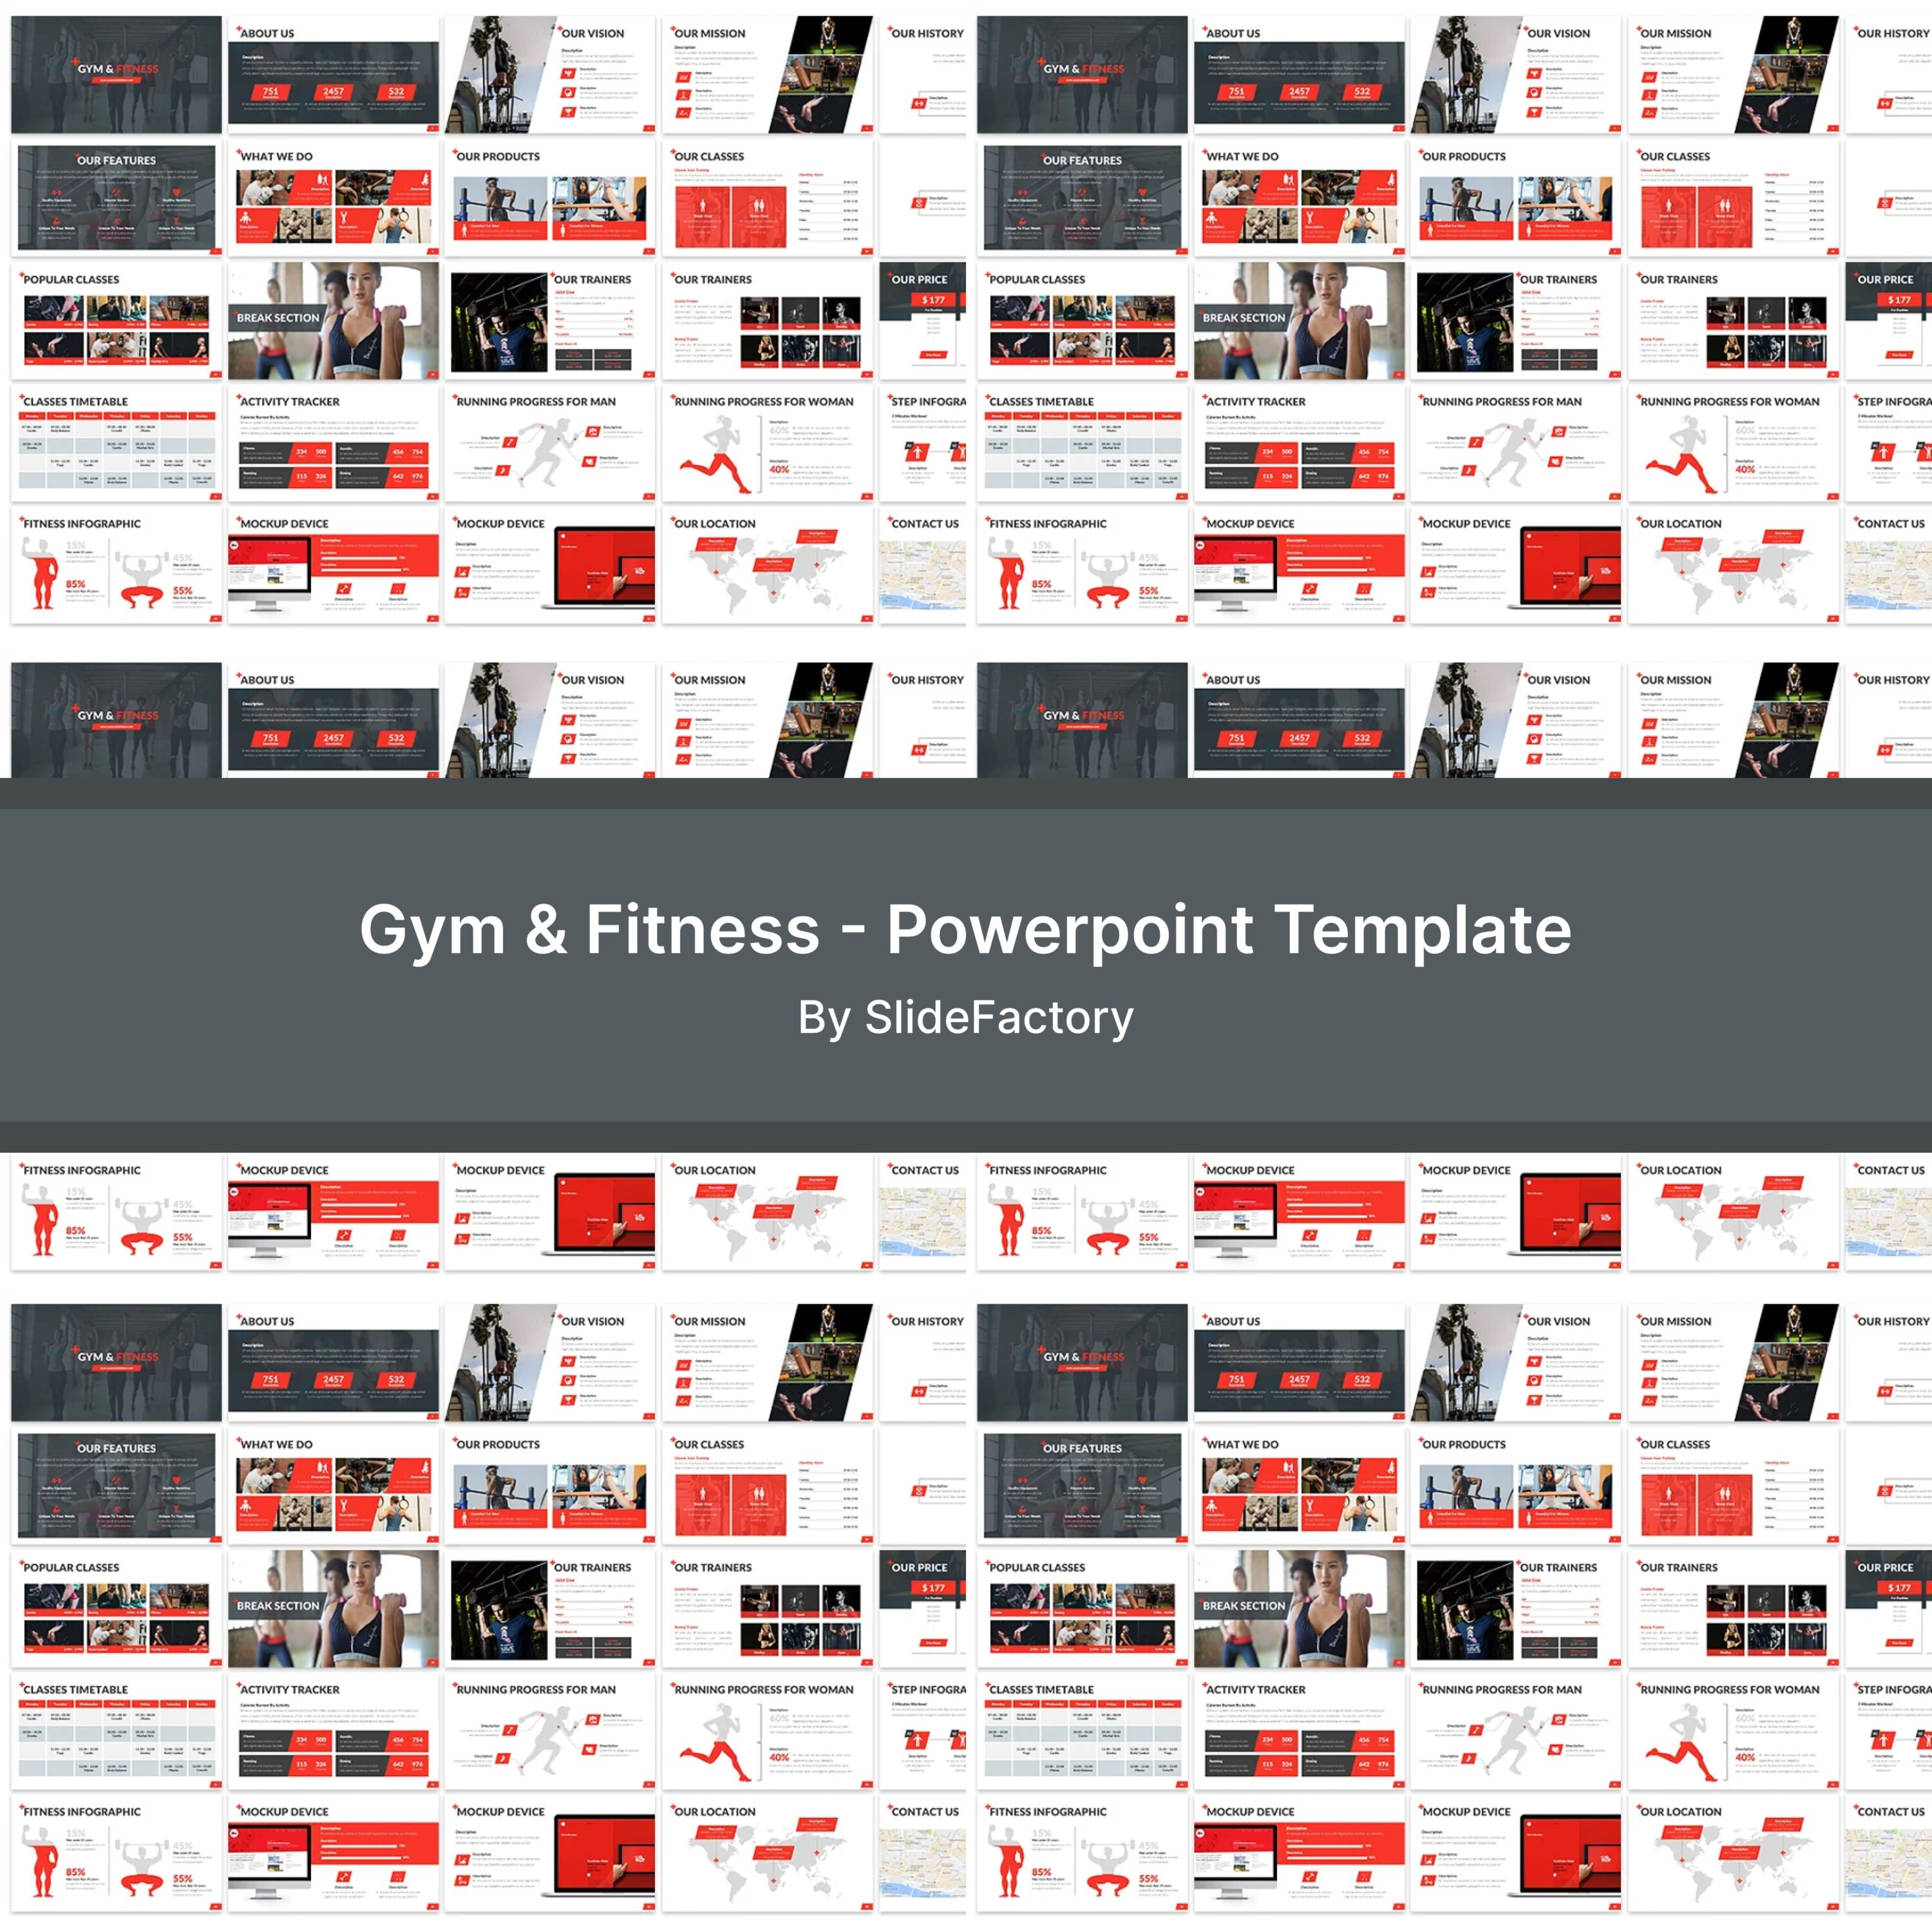 Gym & Fitness - Powerpoint Template.